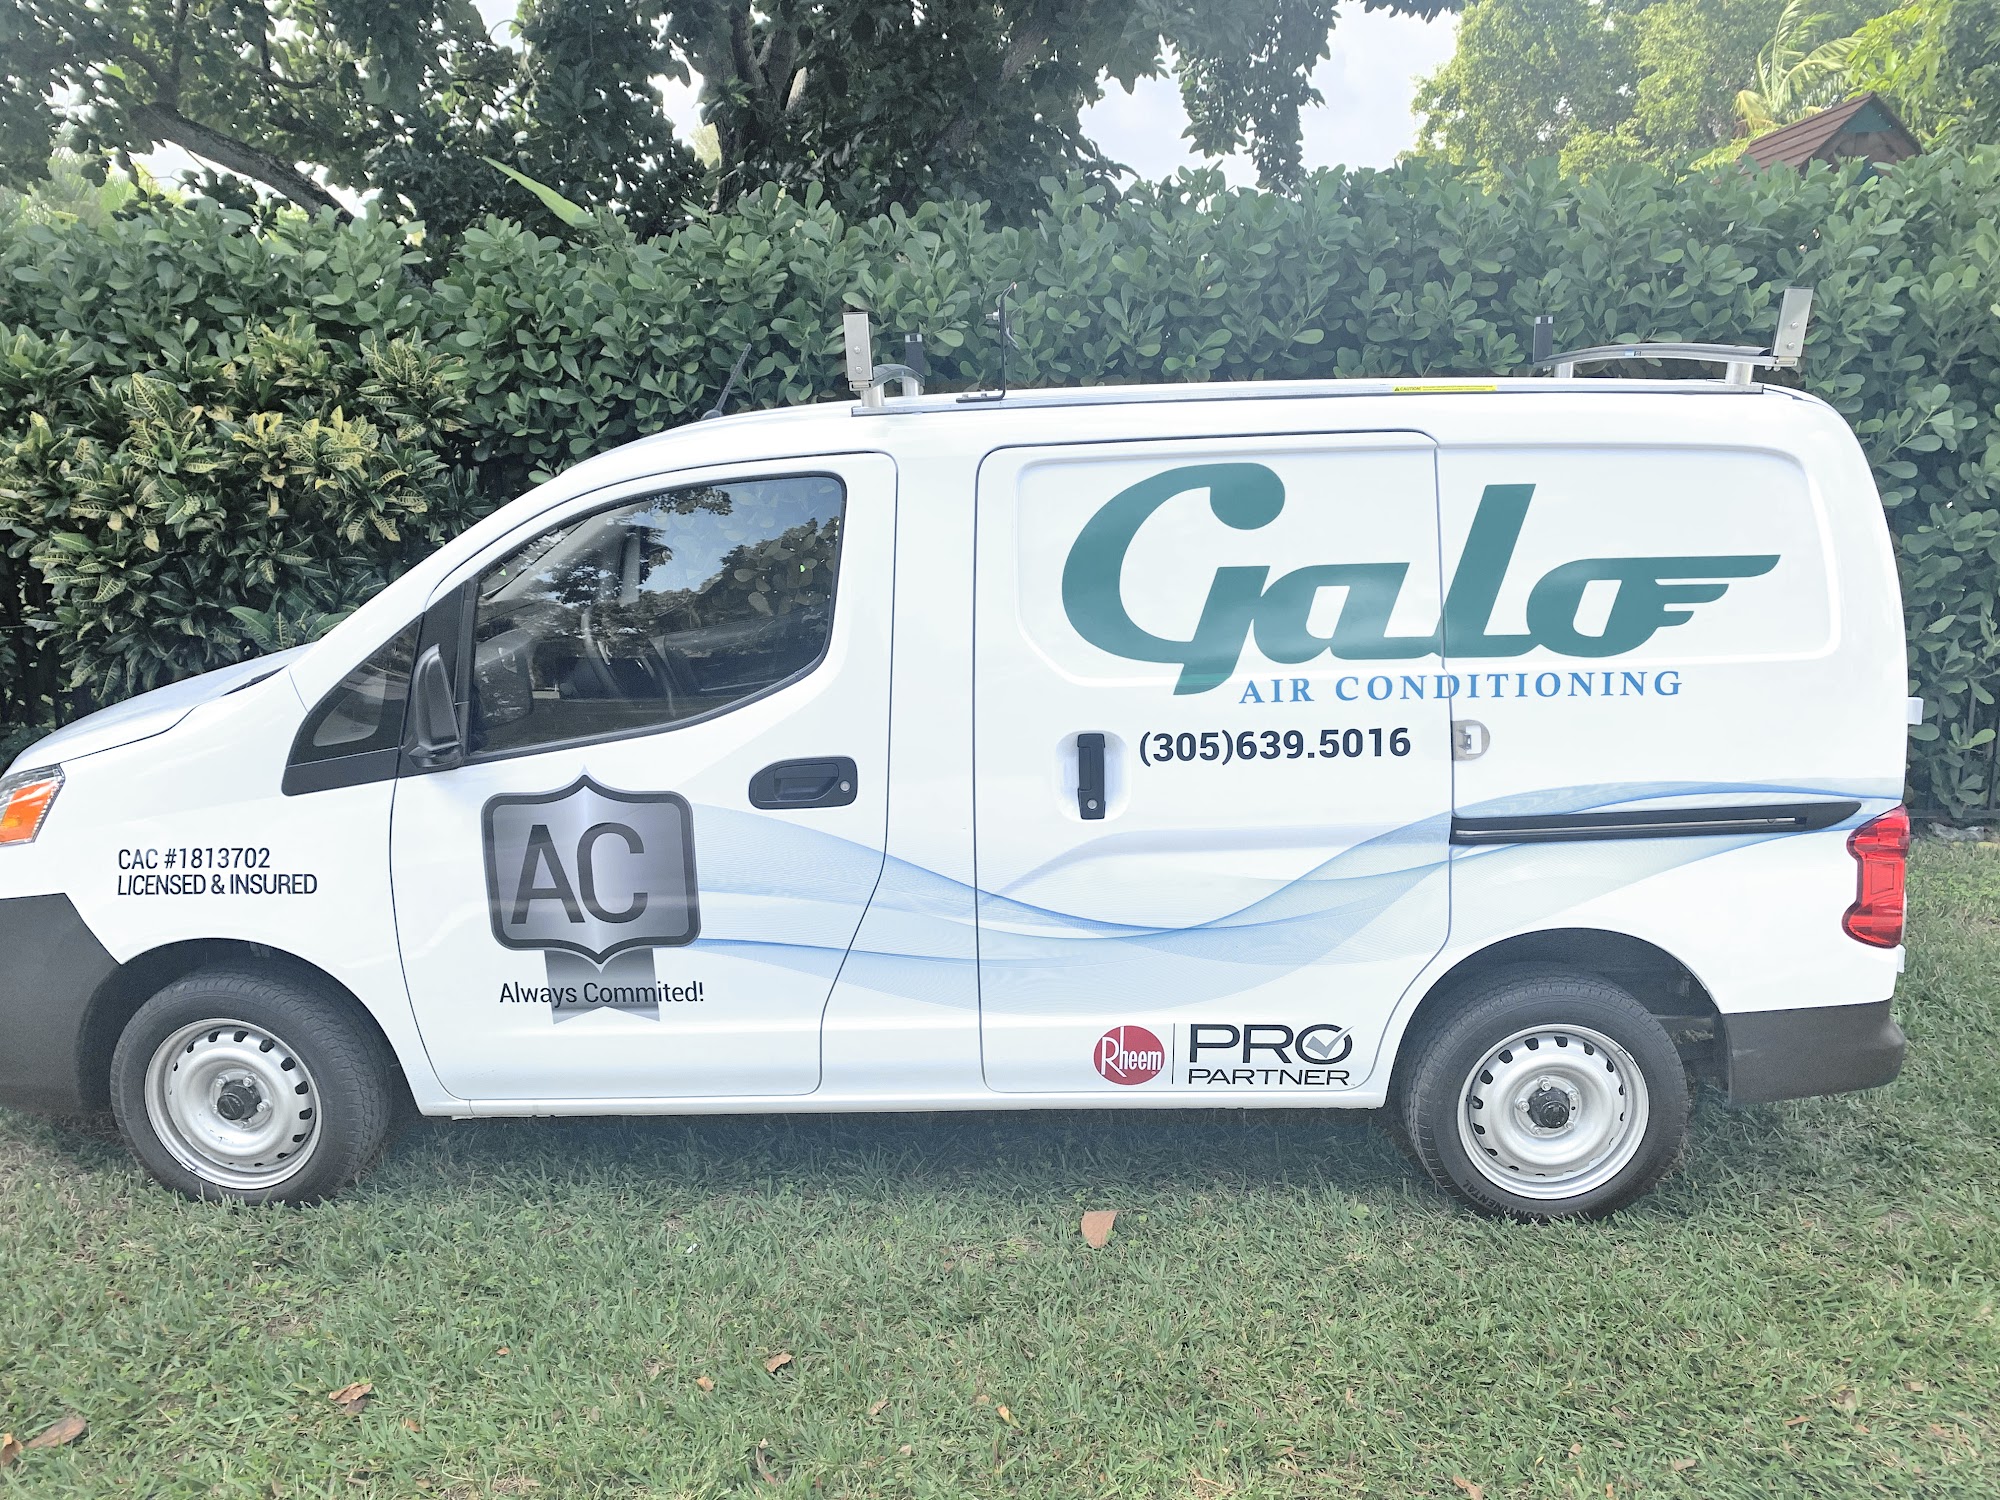 Galo Air Conditioning Inc